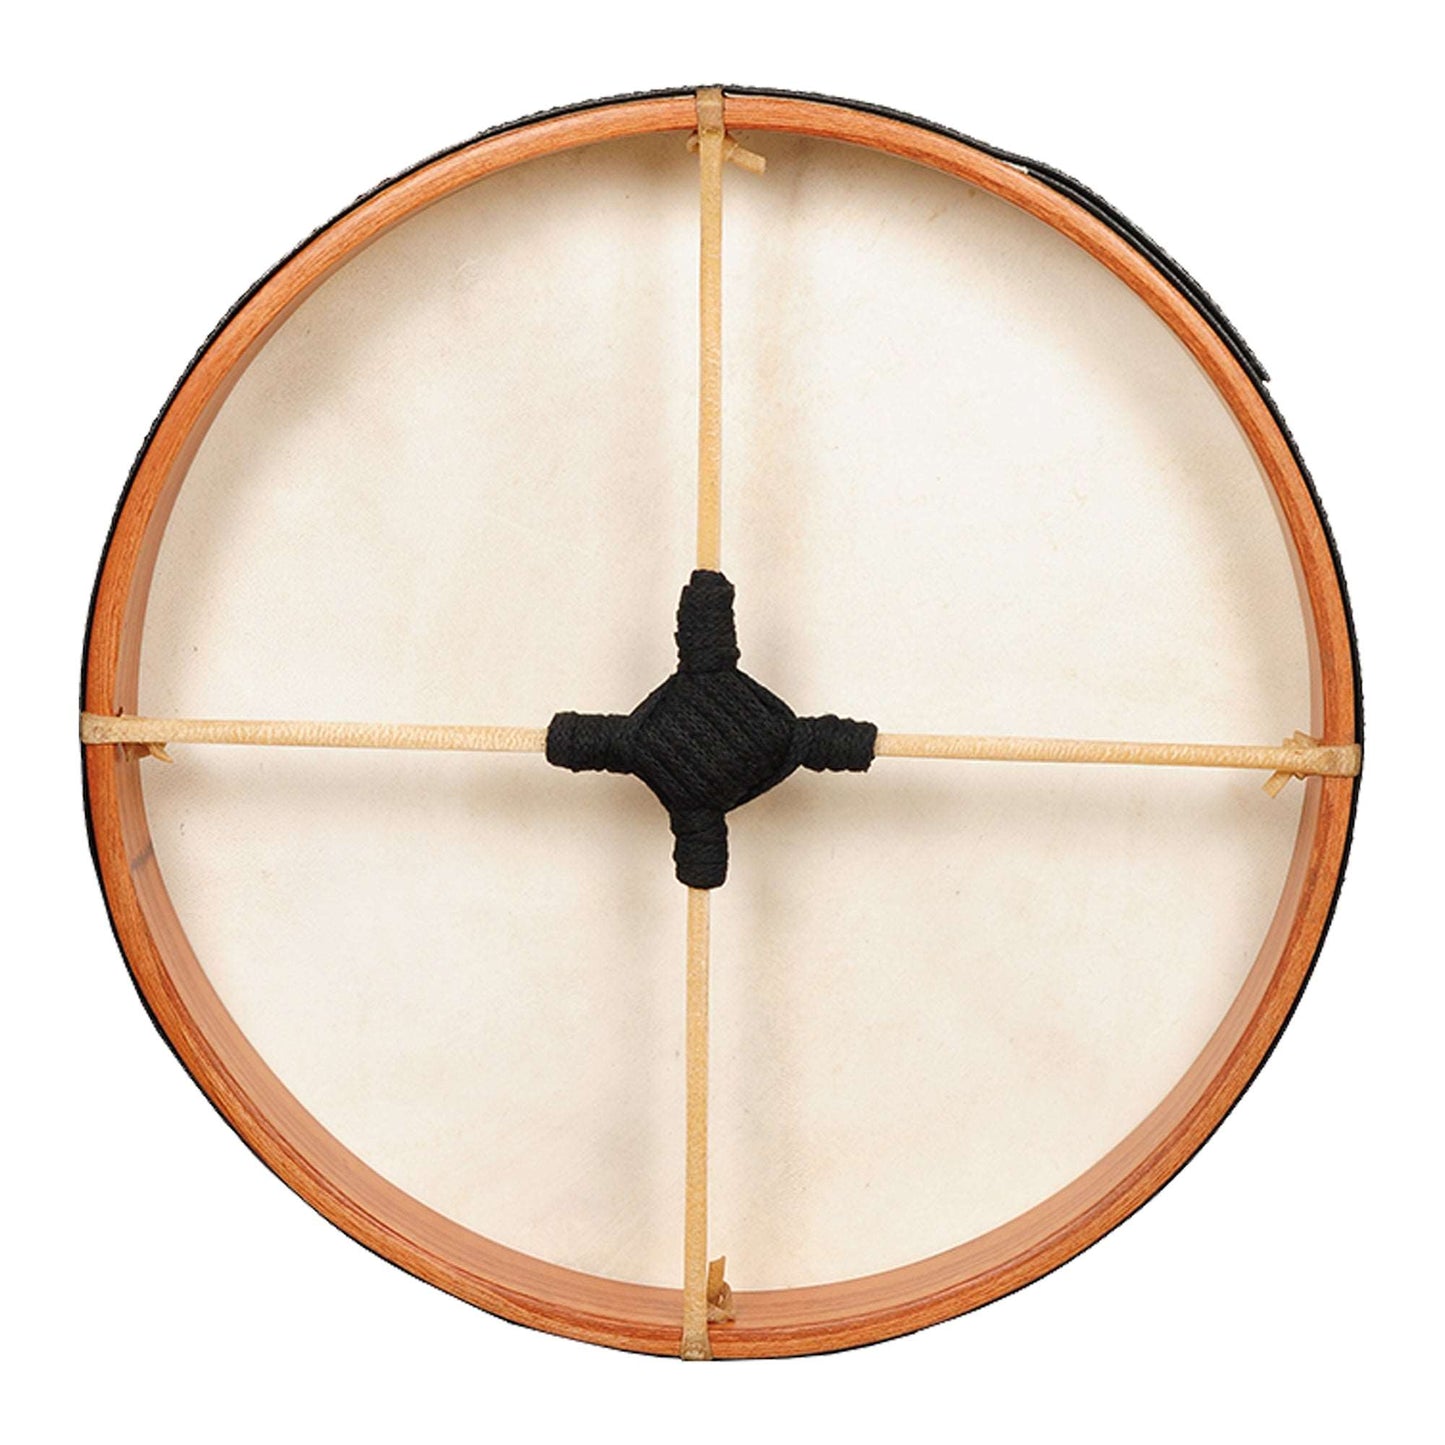 Frame Drum 12 inch Non Tunable Red Cedar